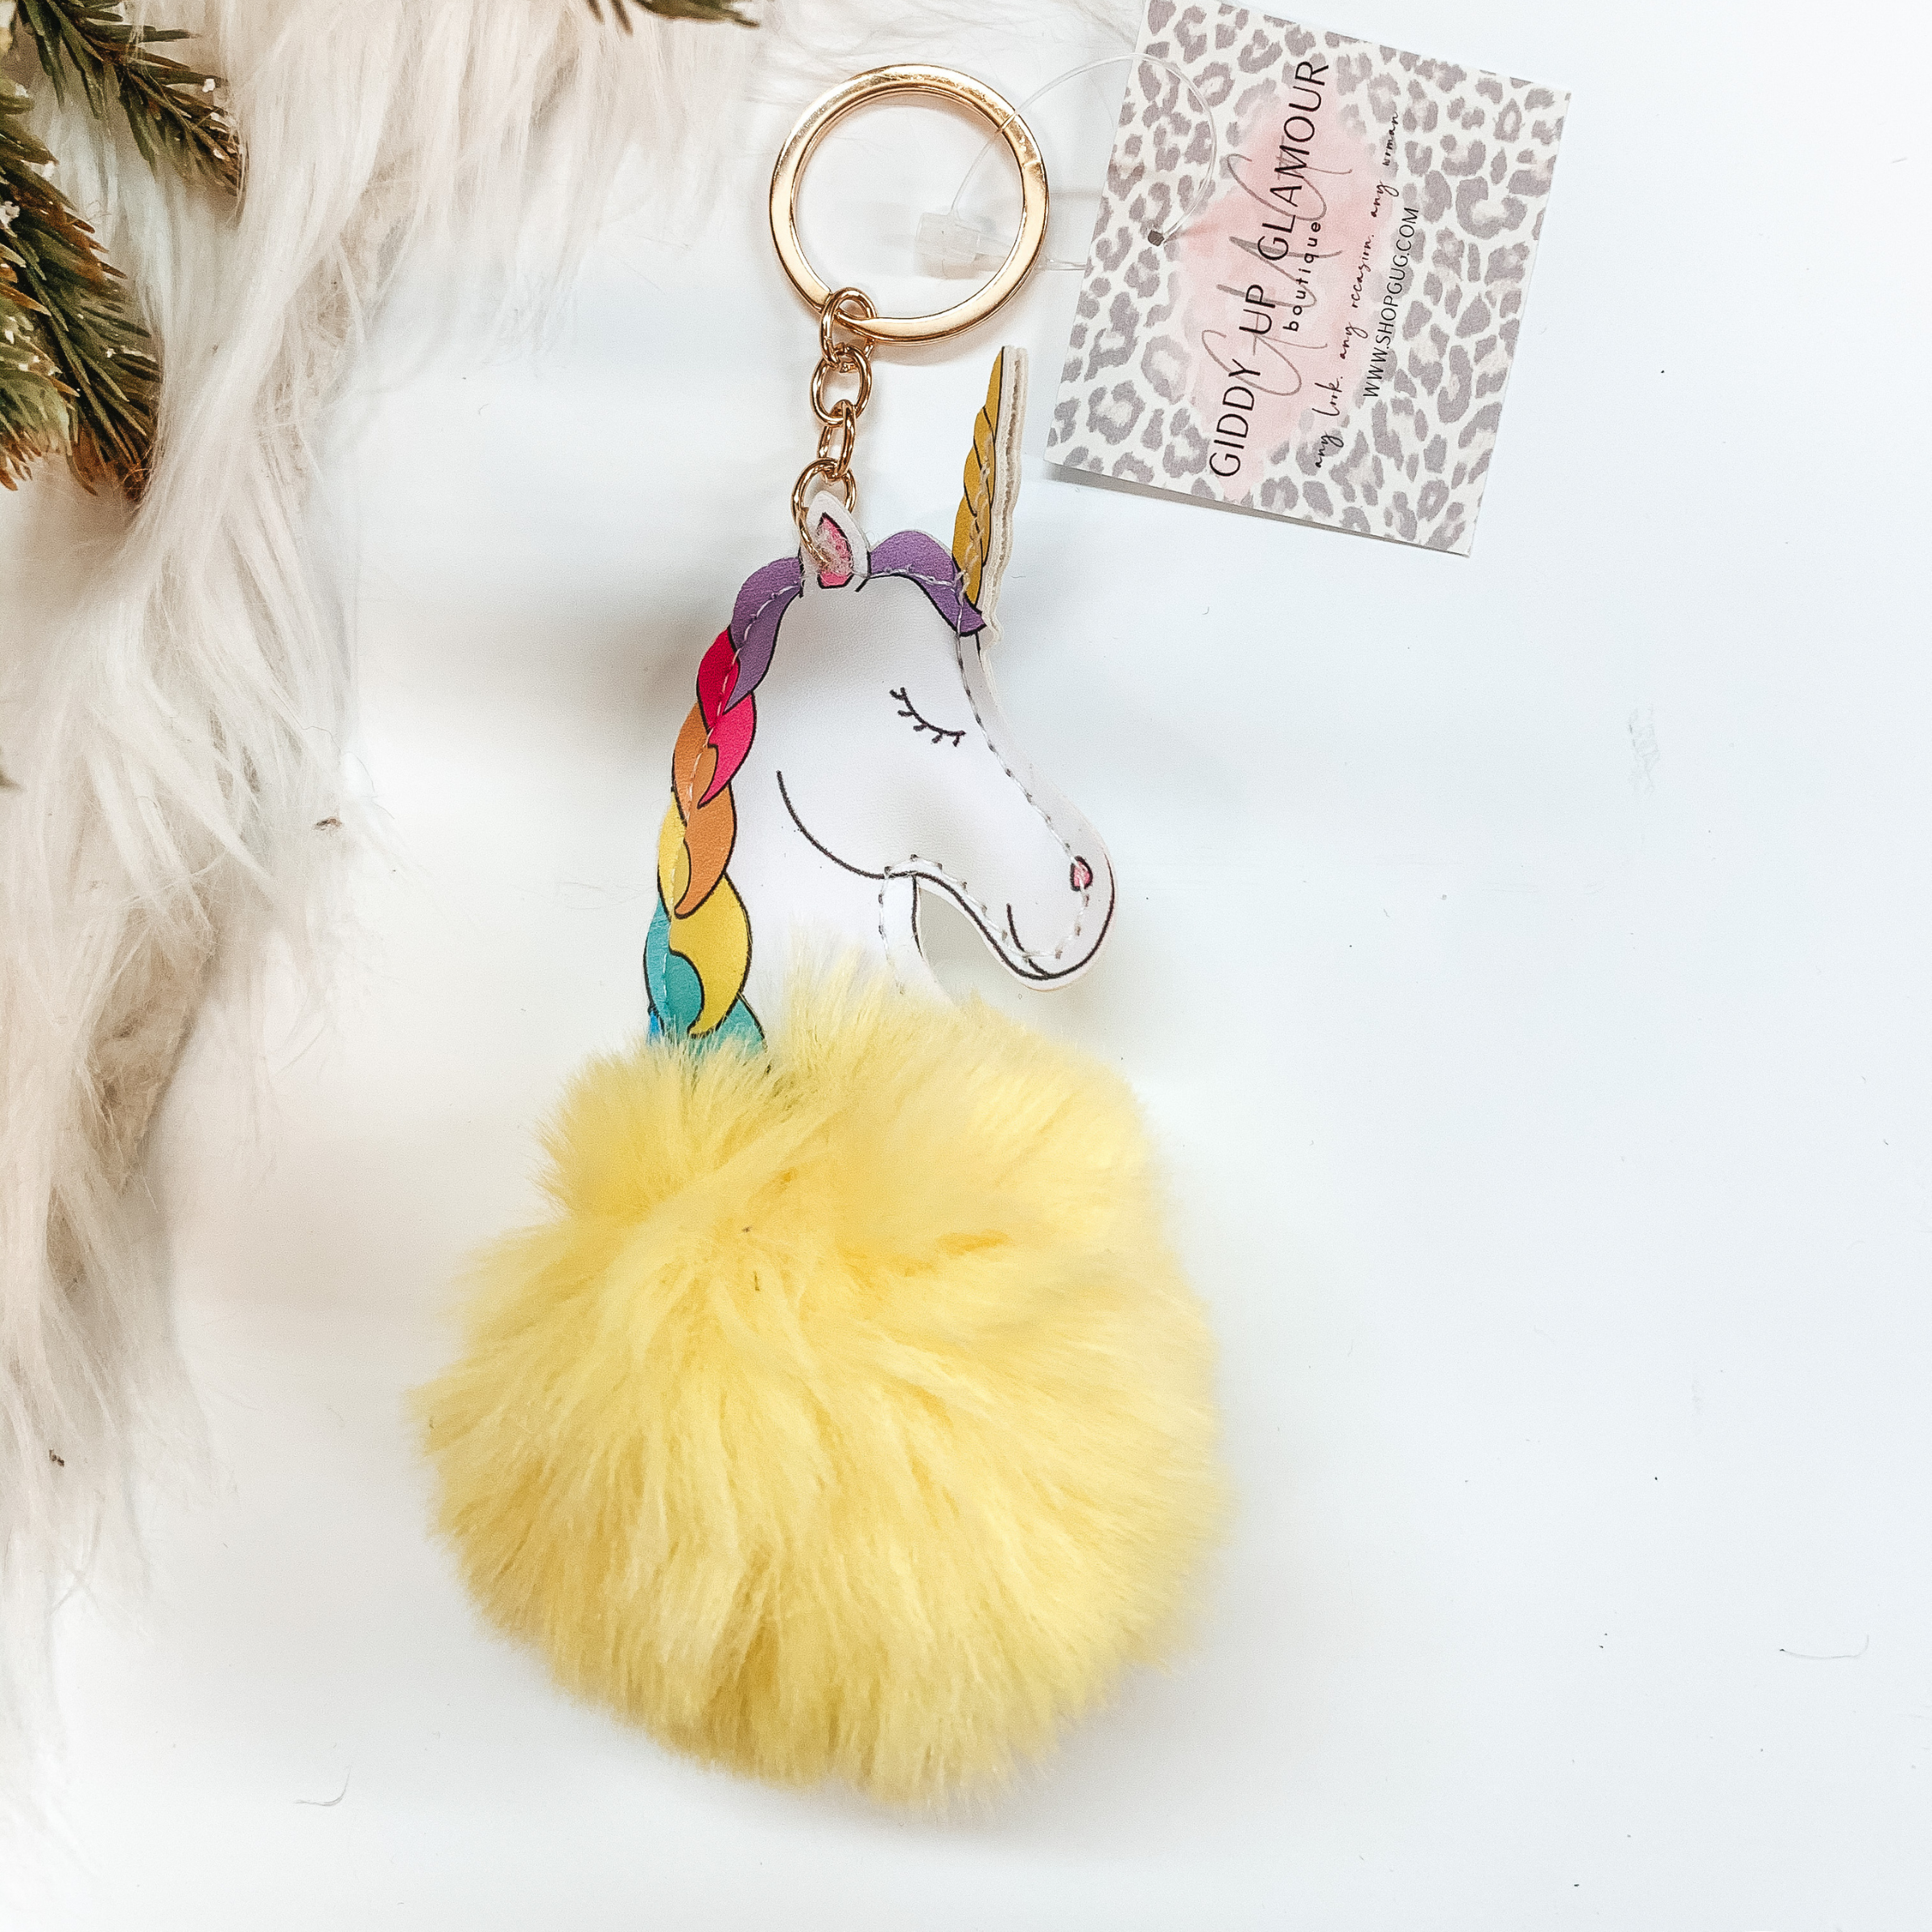 Buy 3 for $10 | Unicorn Puff Ball Keychain - Giddy Up Glamour Boutique